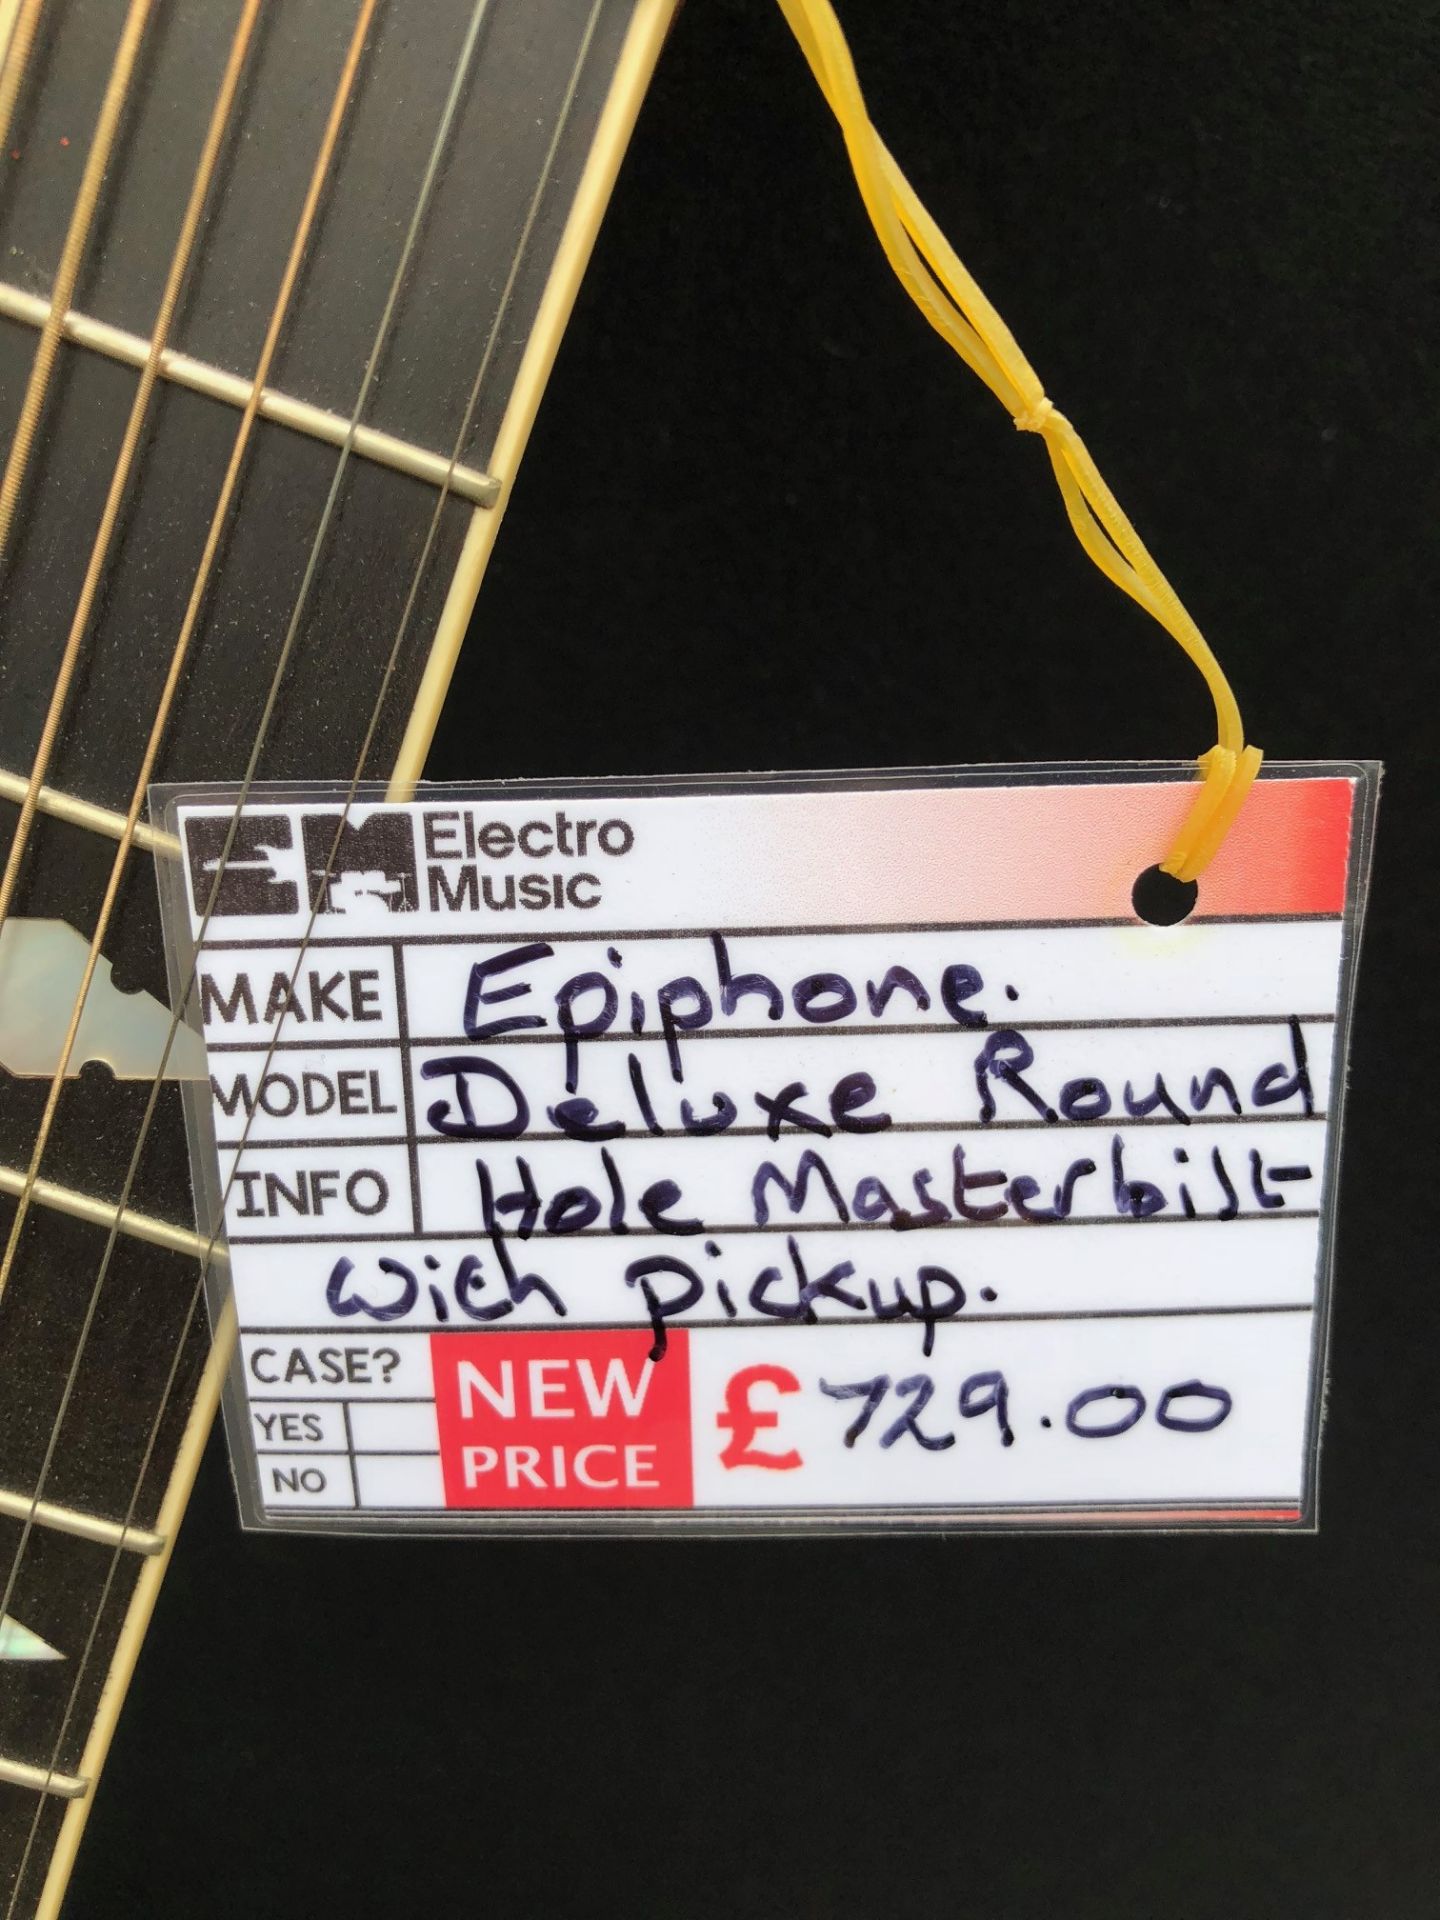 Epiphone Deluxe Round Hole Masterbilt Electro Acoustic Guitar (Brand New Ex Display - RRP £729.00) - Image 4 of 6